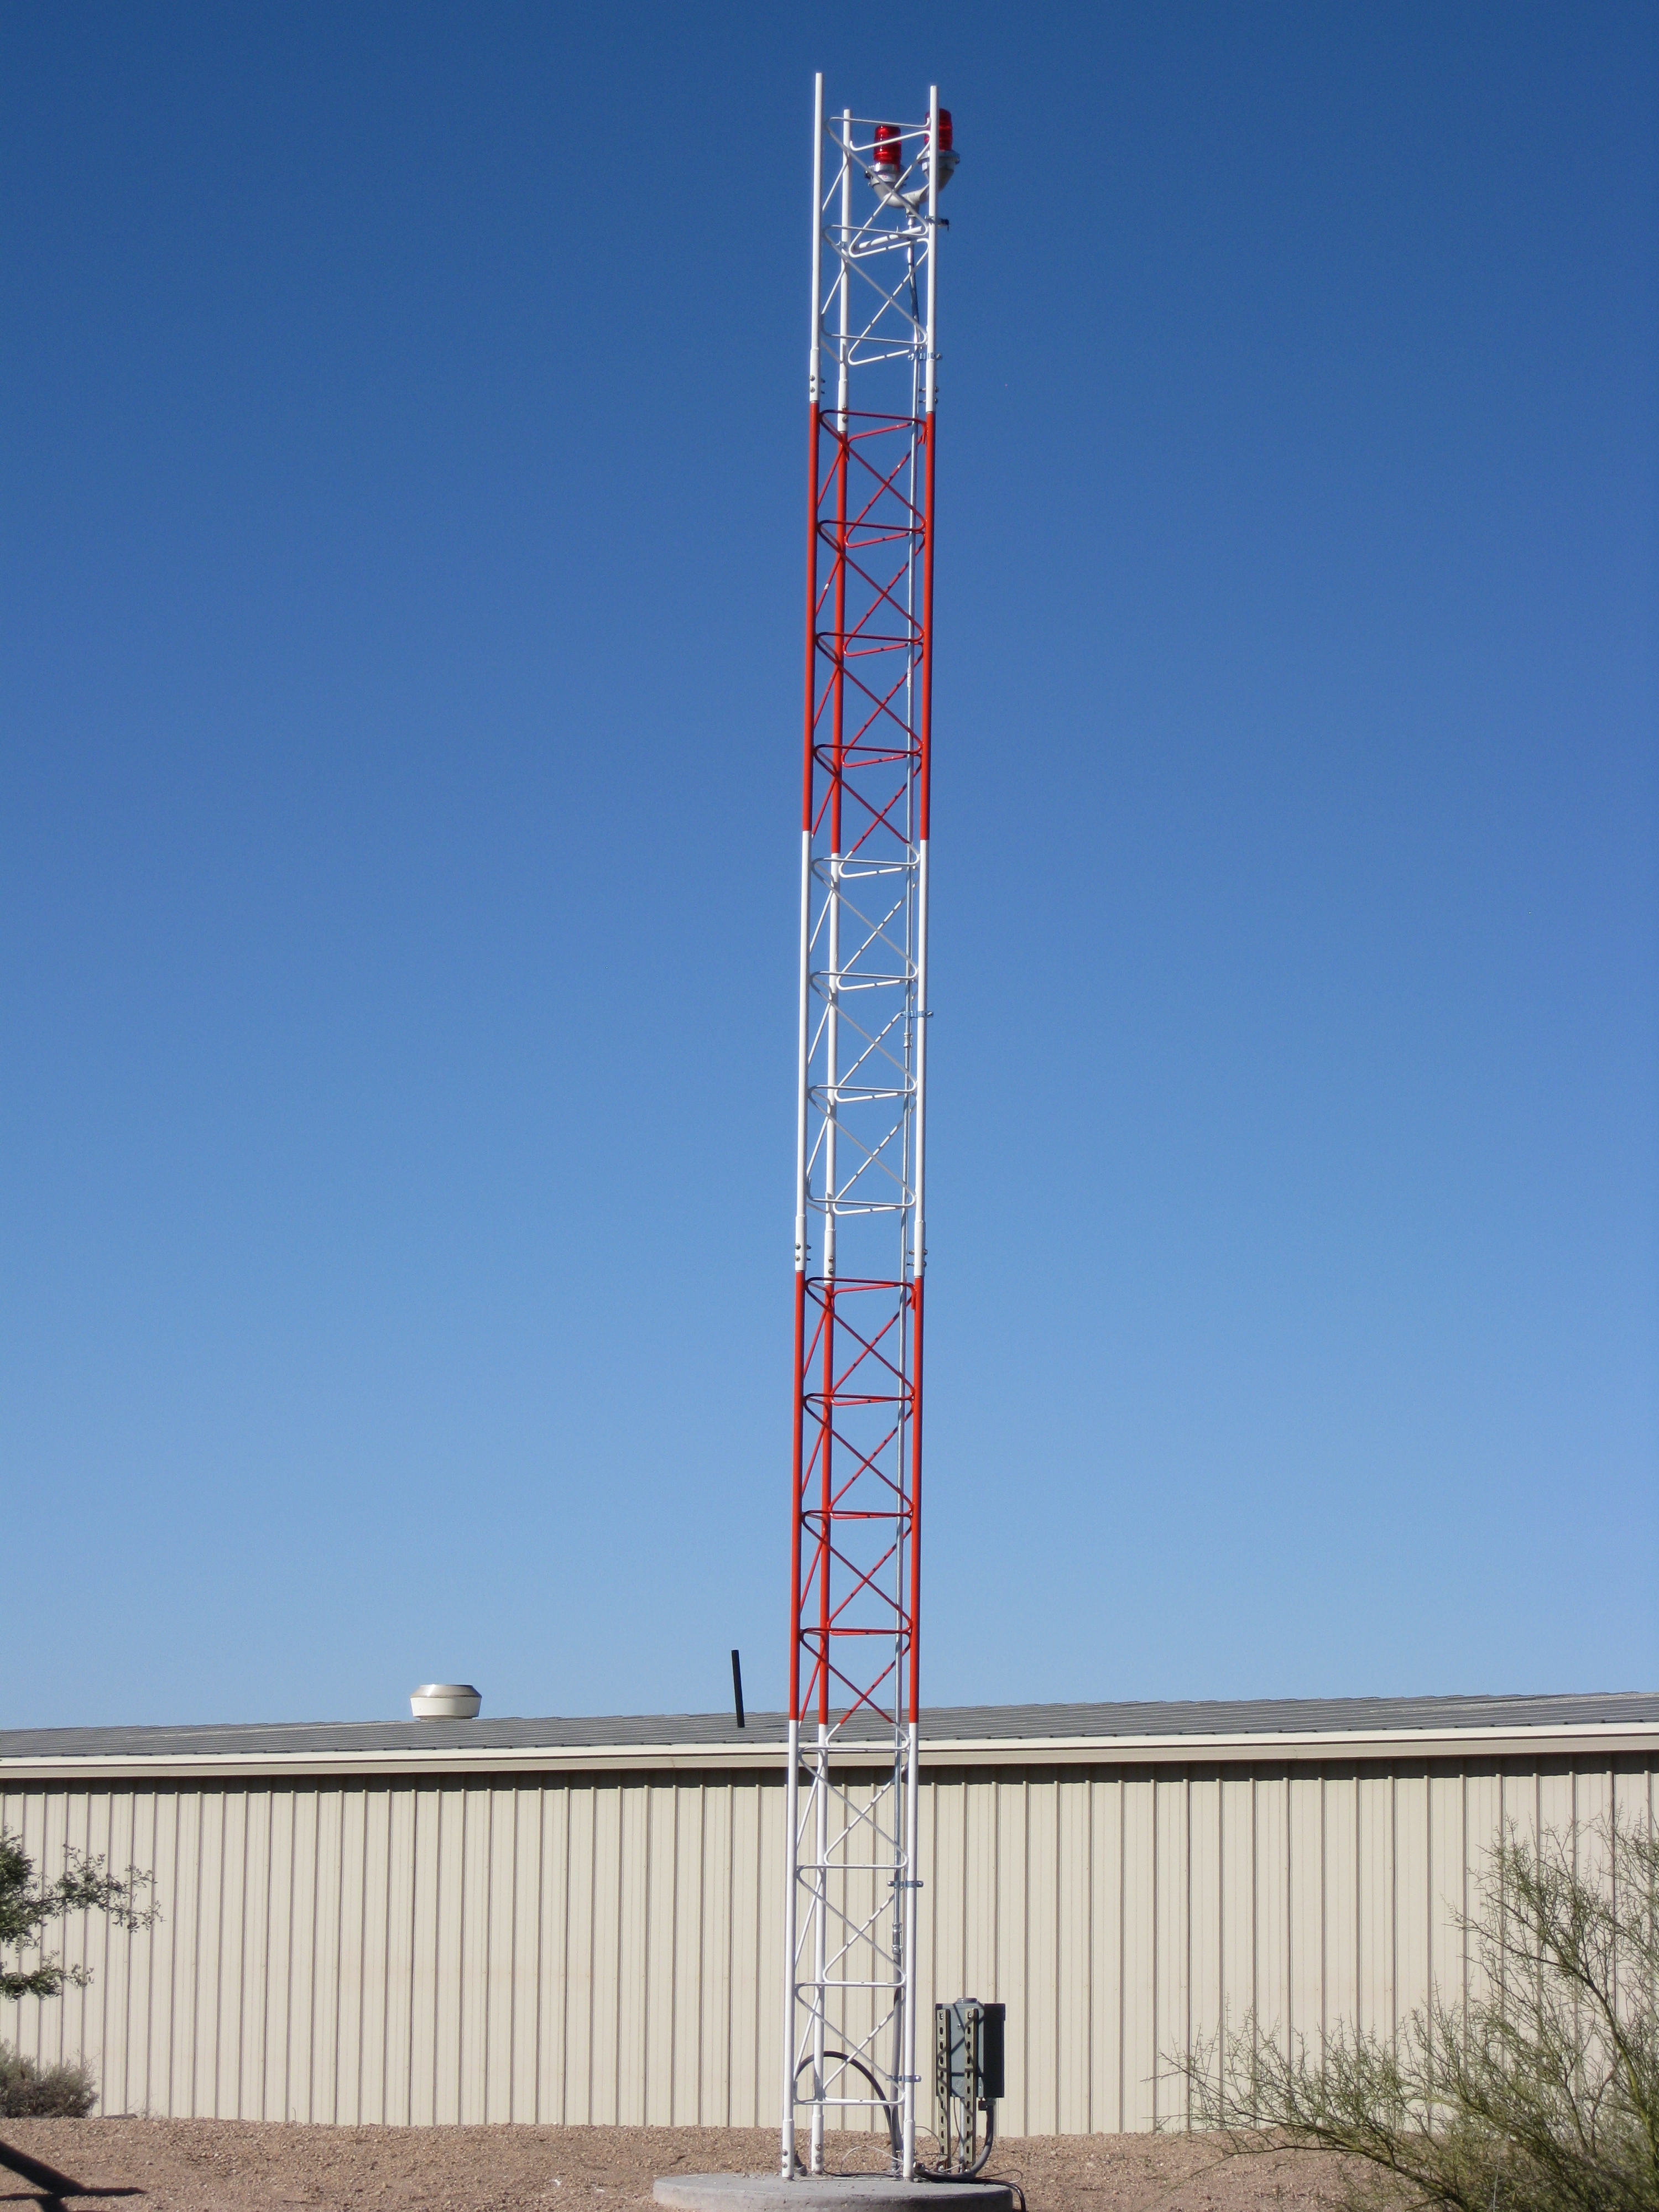 AWOS tower